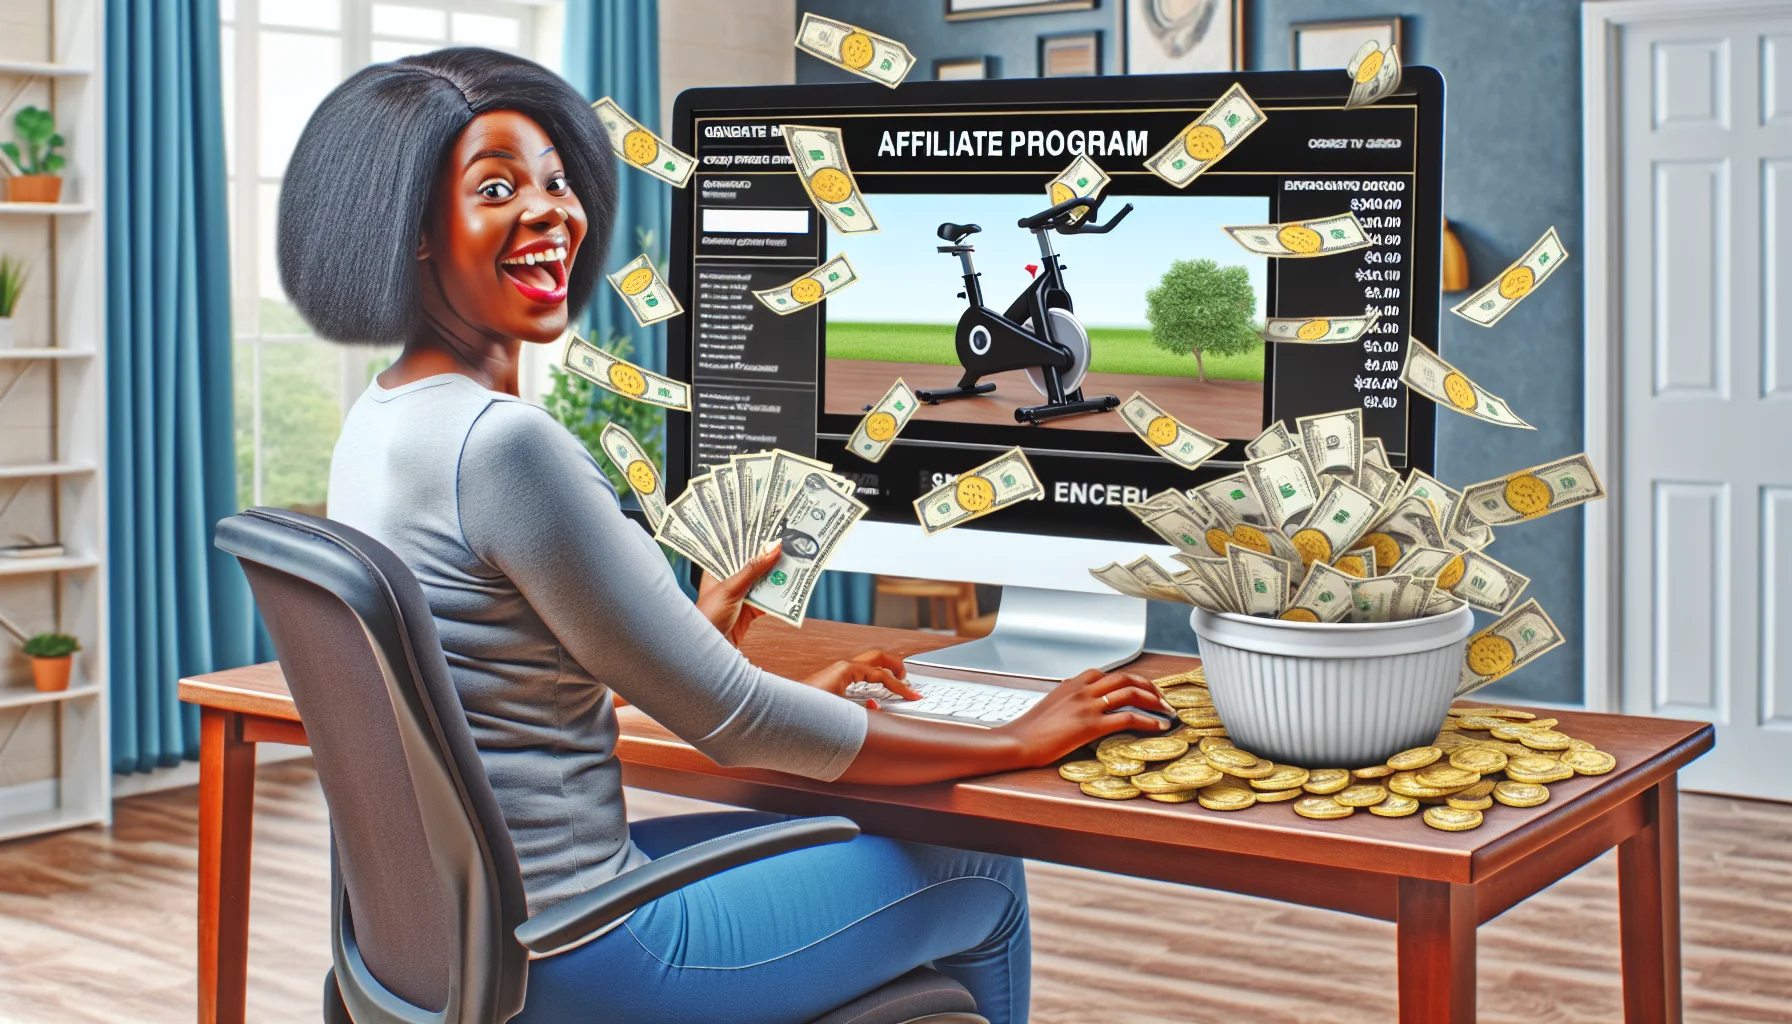 Generate a humorously realistic image that encapsulates the concept of an online affiliate program for a popular exercise bike company. The scene should be enticing, implying the possibility of making money online. Perhaps depict a cheerful Black woman sitting at a computer, joyfully monitoring her affiliate program dashboard. There could be humorously oversized coins or bills flooding out from the computer screen, an exaggerated symbolization of her online earnings. This concept should be placed against a backdrop of a tastefully decorated home office to show a comfortable working environment.